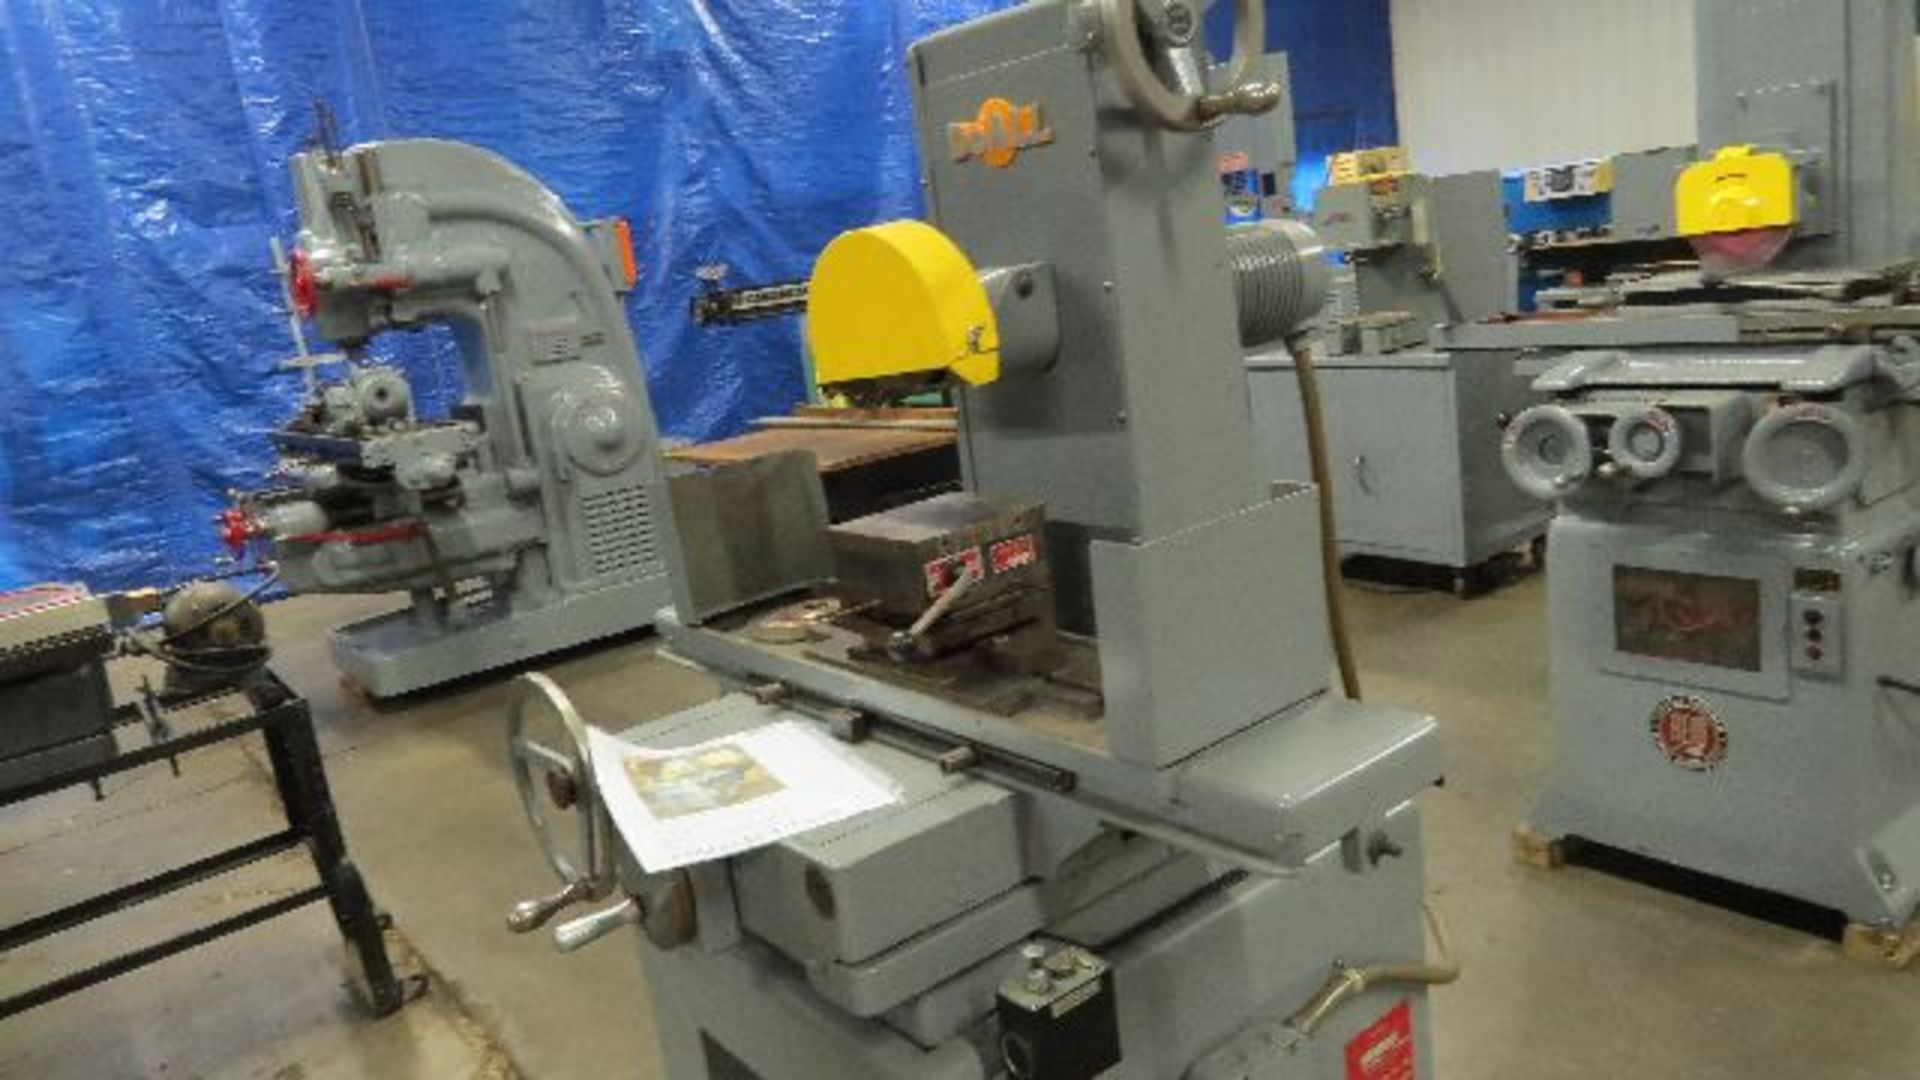 Do All Super Precision surface grinder, model DH-12, sn 138-672559, 1 hp 3/60/208/ 220/440 volot - Image 2 of 2